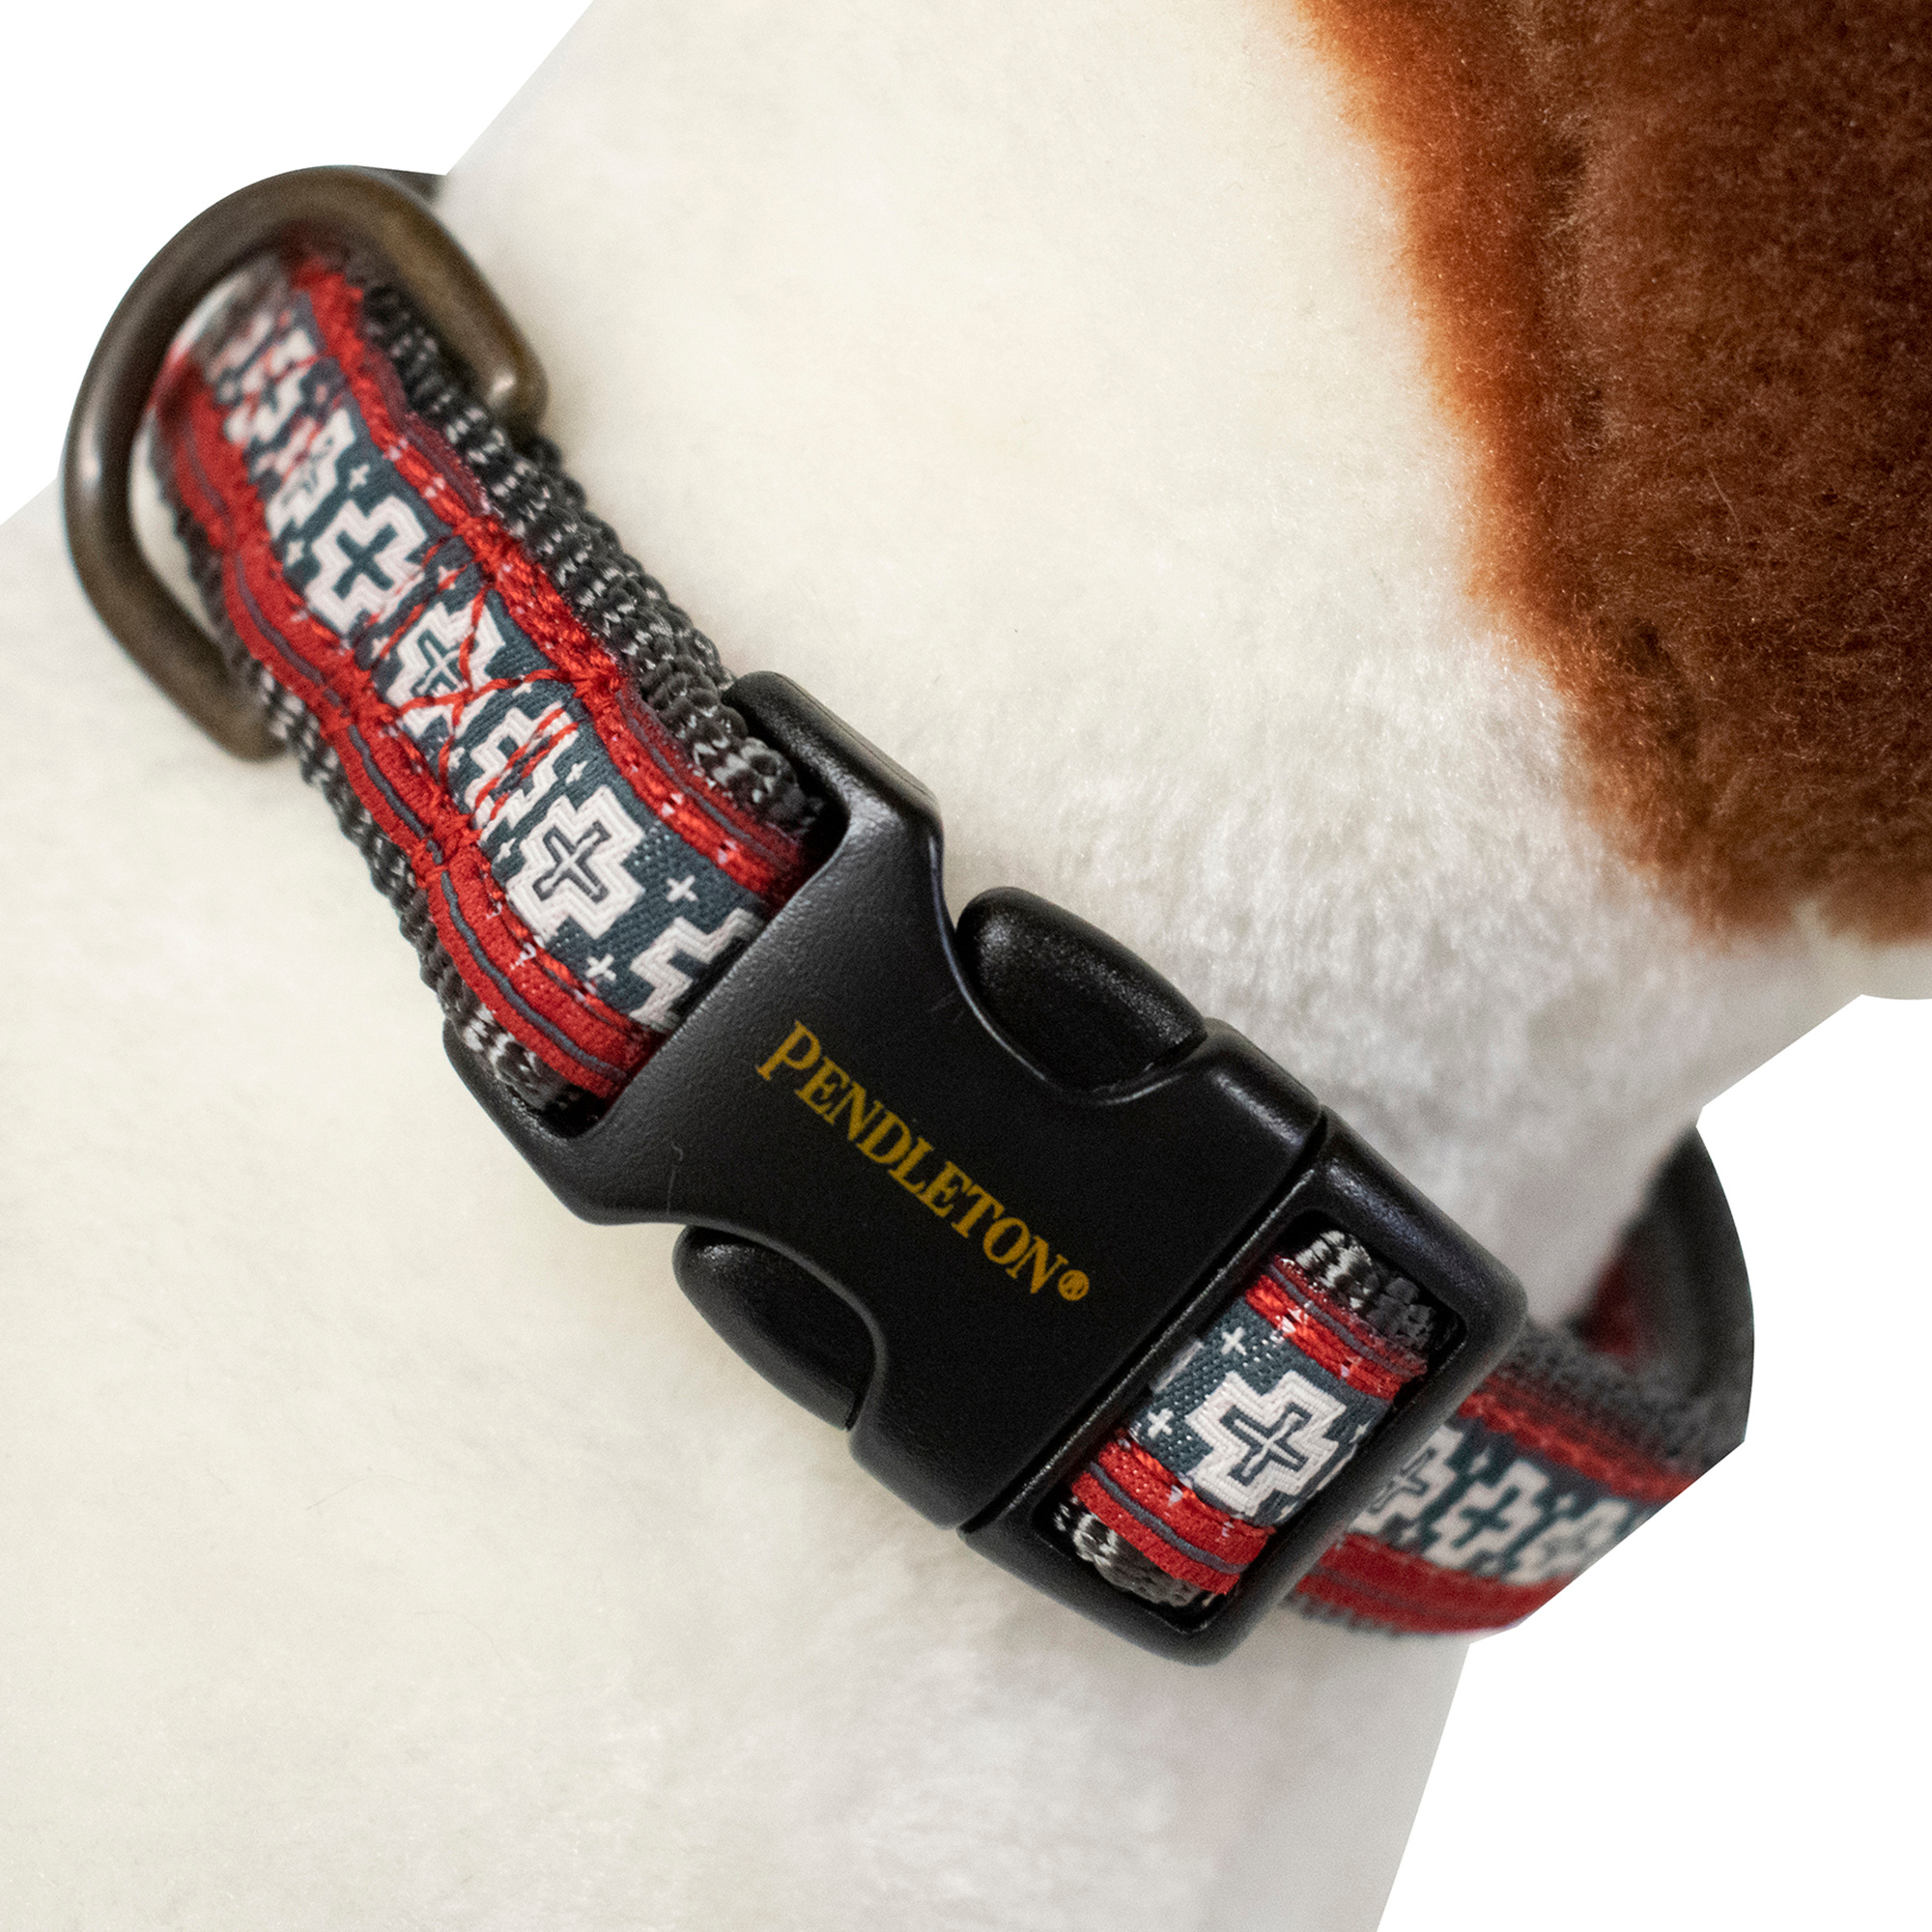 PENDLETON-DOG-COLLAR-LEASH-WHITE-RED-GRAY-SAN-MIGUEL-CLASSICS-COLLECTION